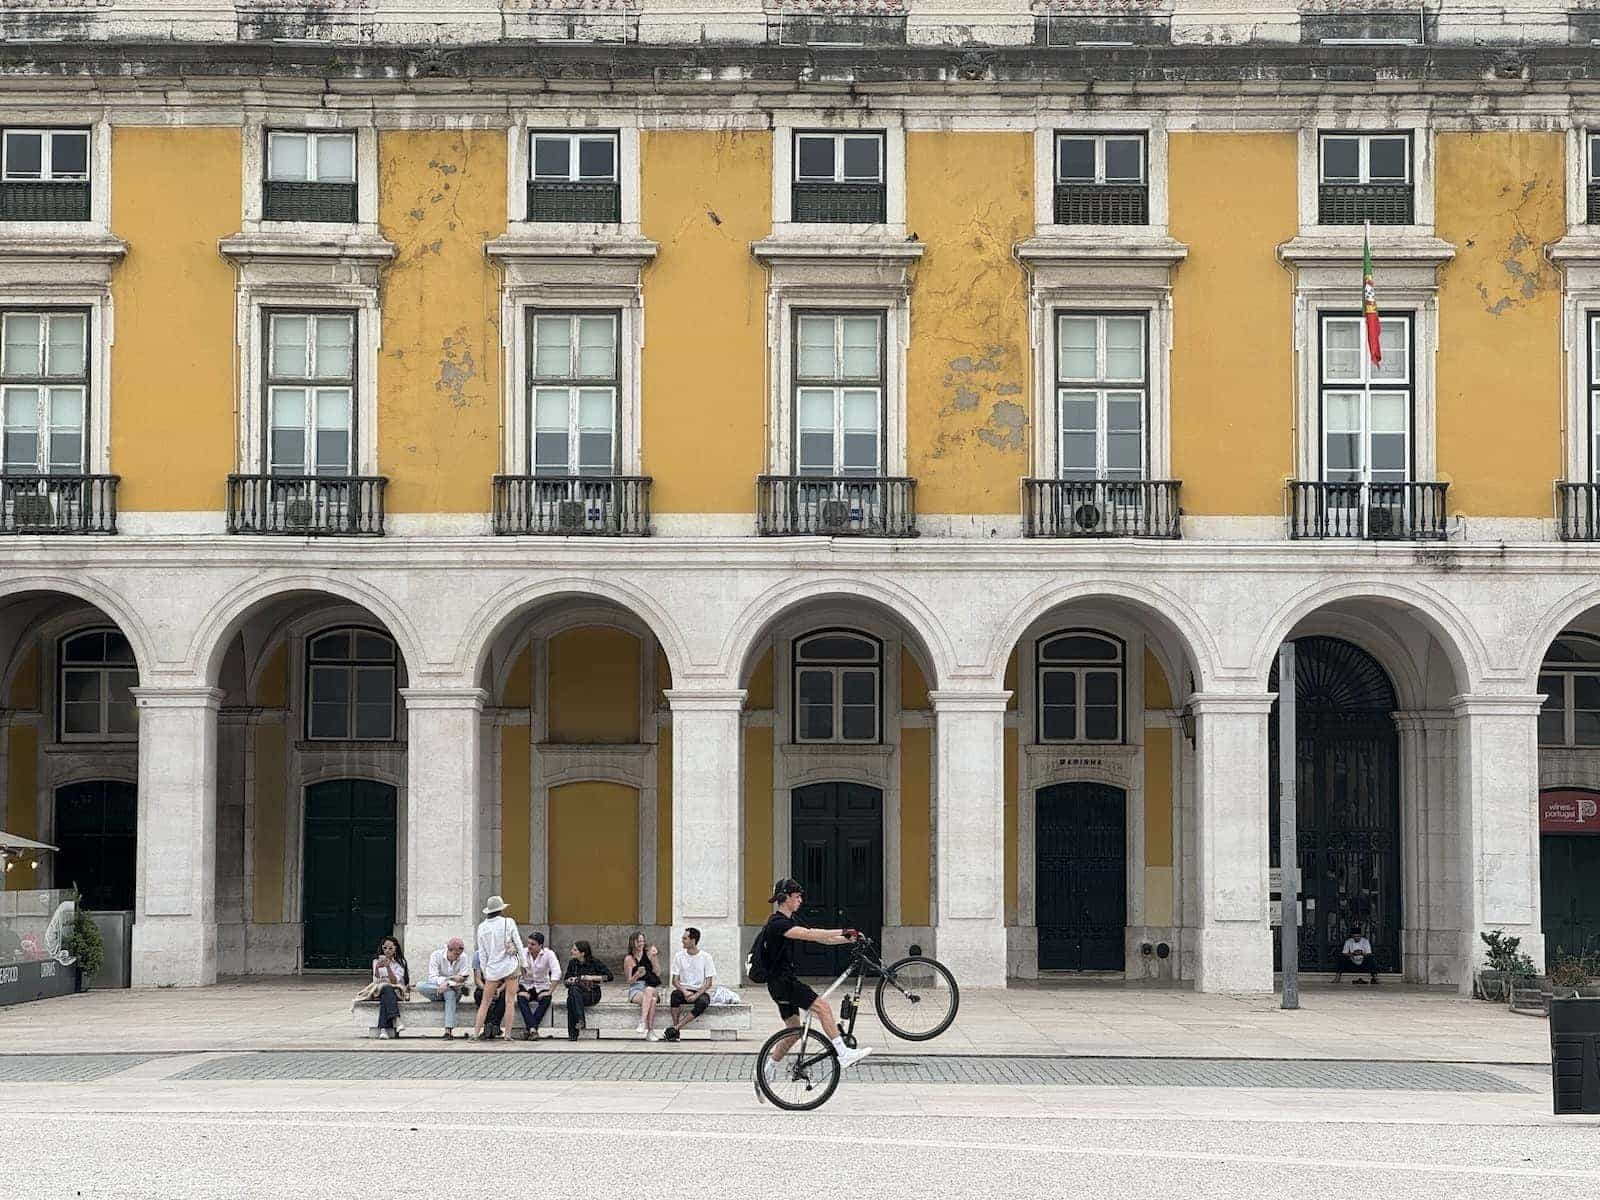 Cyclist showing off in the main square of Lisbon.